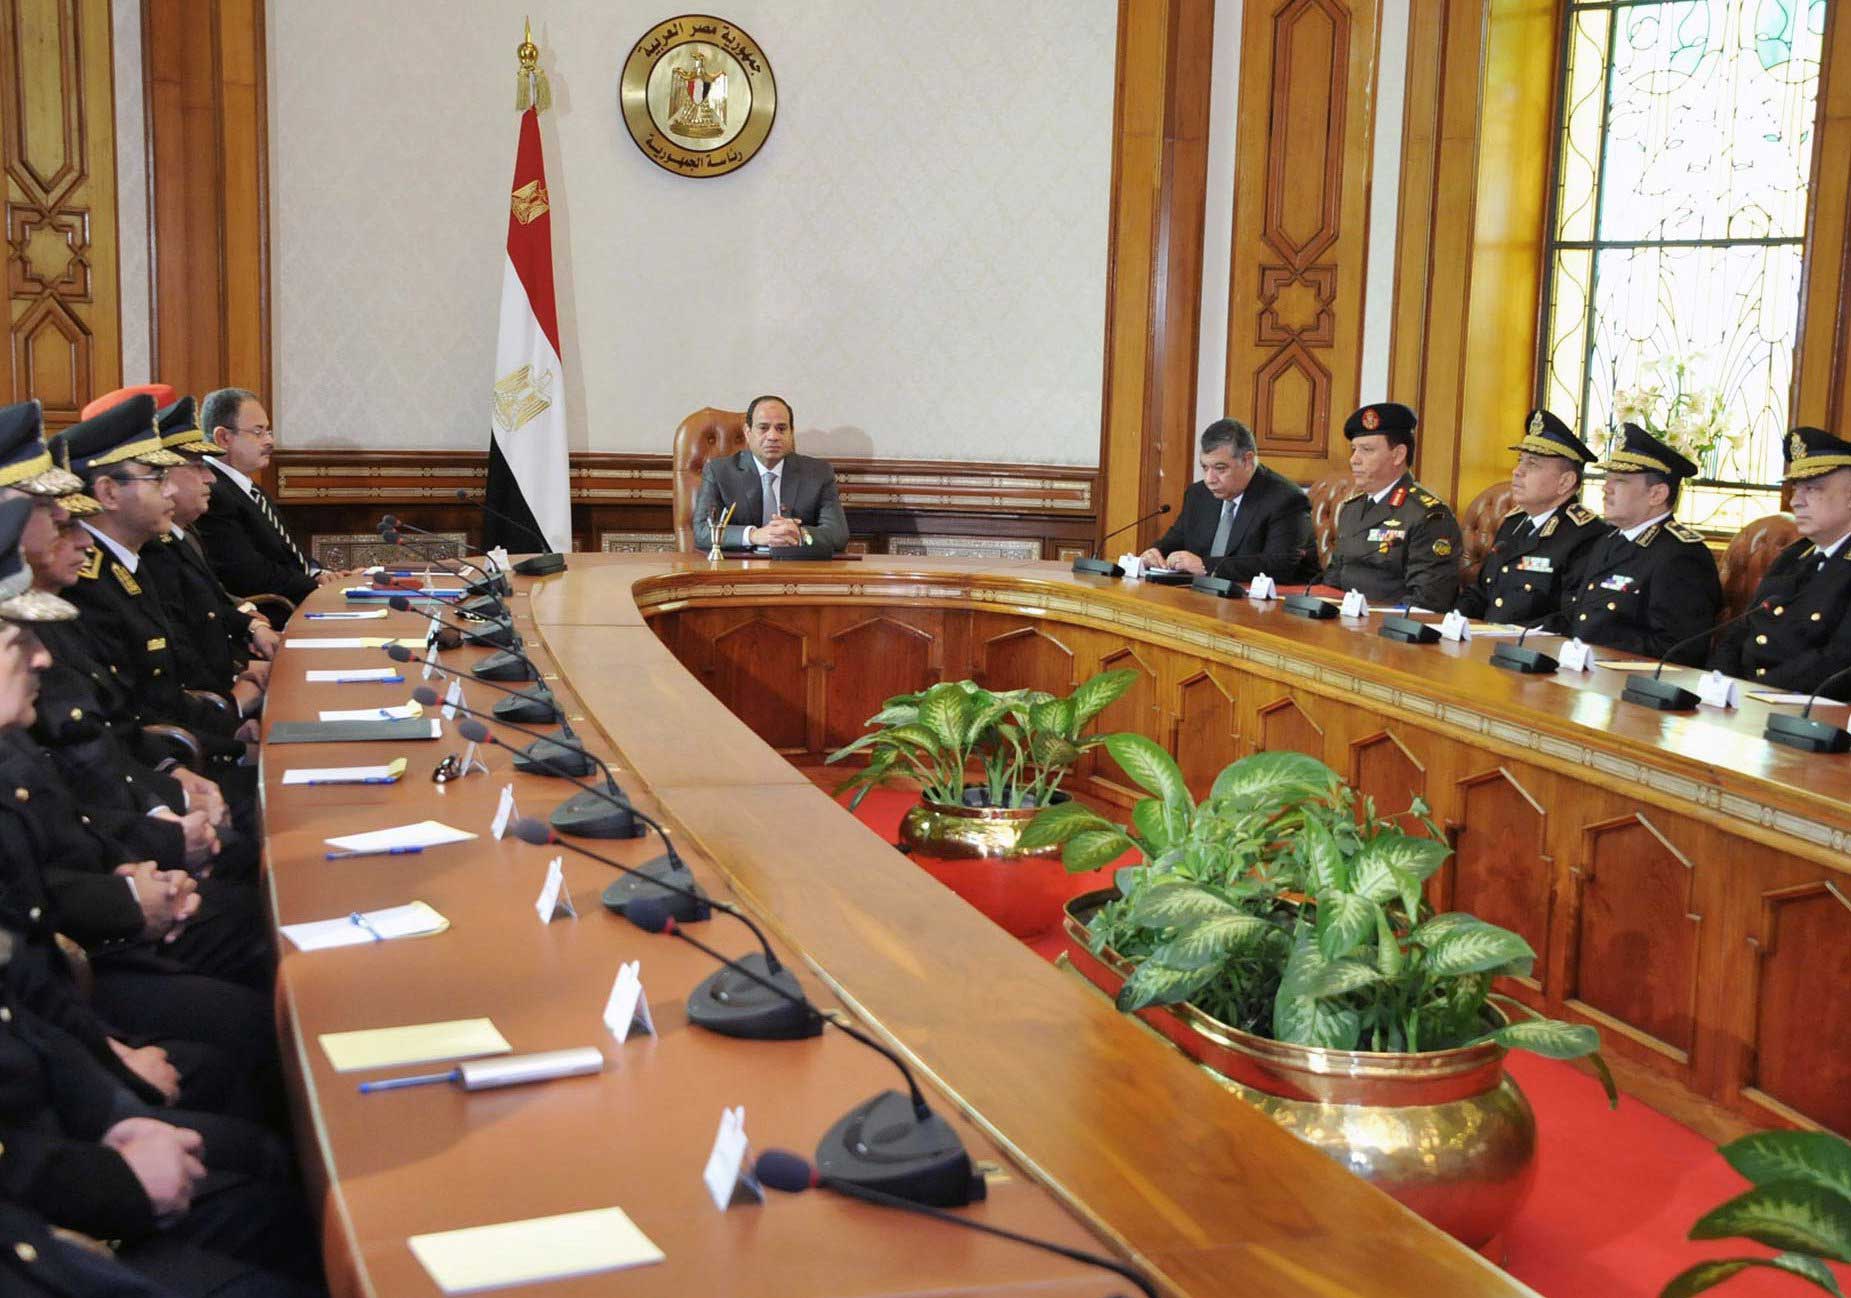 President Abdul Fattah al-Sisi meeting with his Interior Minister Magdy Abdel Ghaffar, left, the chief of intelligence and military officials in Cairo on April 16, 2015 (Fadi Fares—AFP/Getty Images)